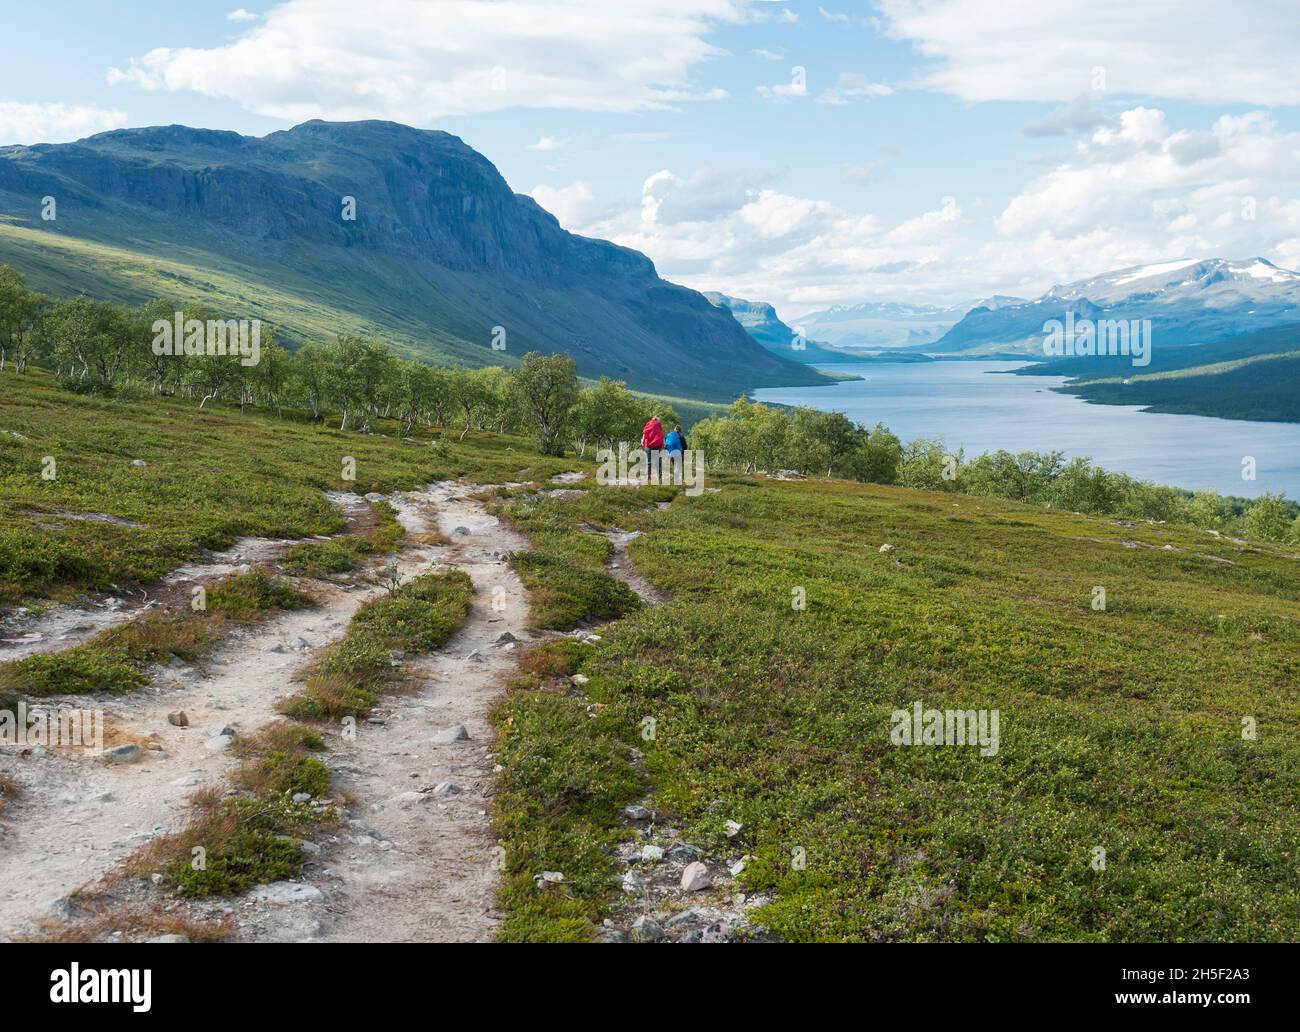 Lapland landscape with beautiful river Lulealven, snow capped mountain, birch tree and footpath of Kungsleden hiking trail with couple of hikers near Stock Photo